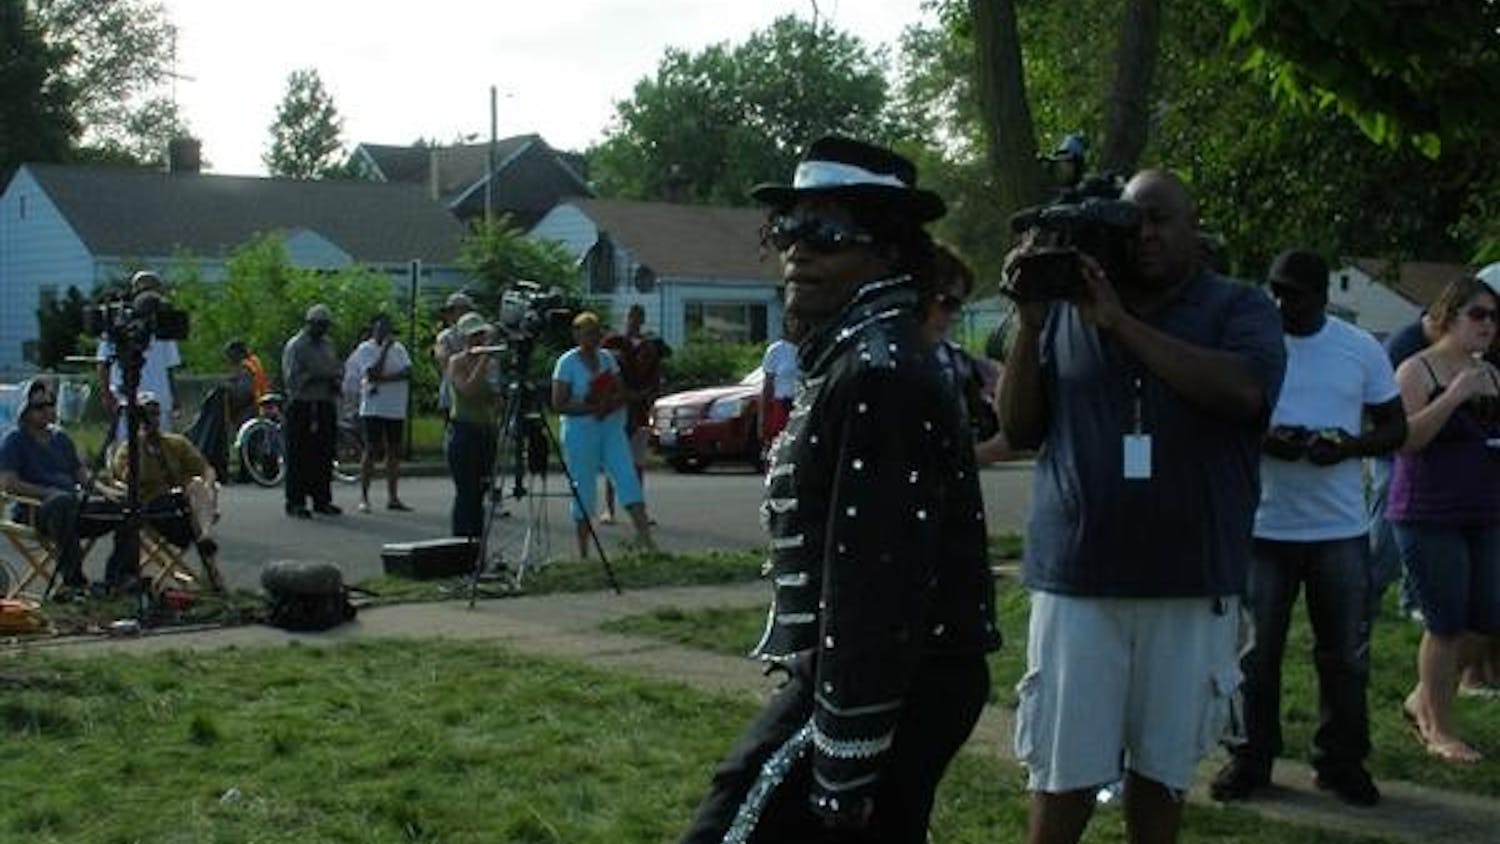 Antonio Wilson, dressed in full Jackson stage garb, excites the crowd of Jackson fans on the front lawn of Jackson's boyhood home in Gary.